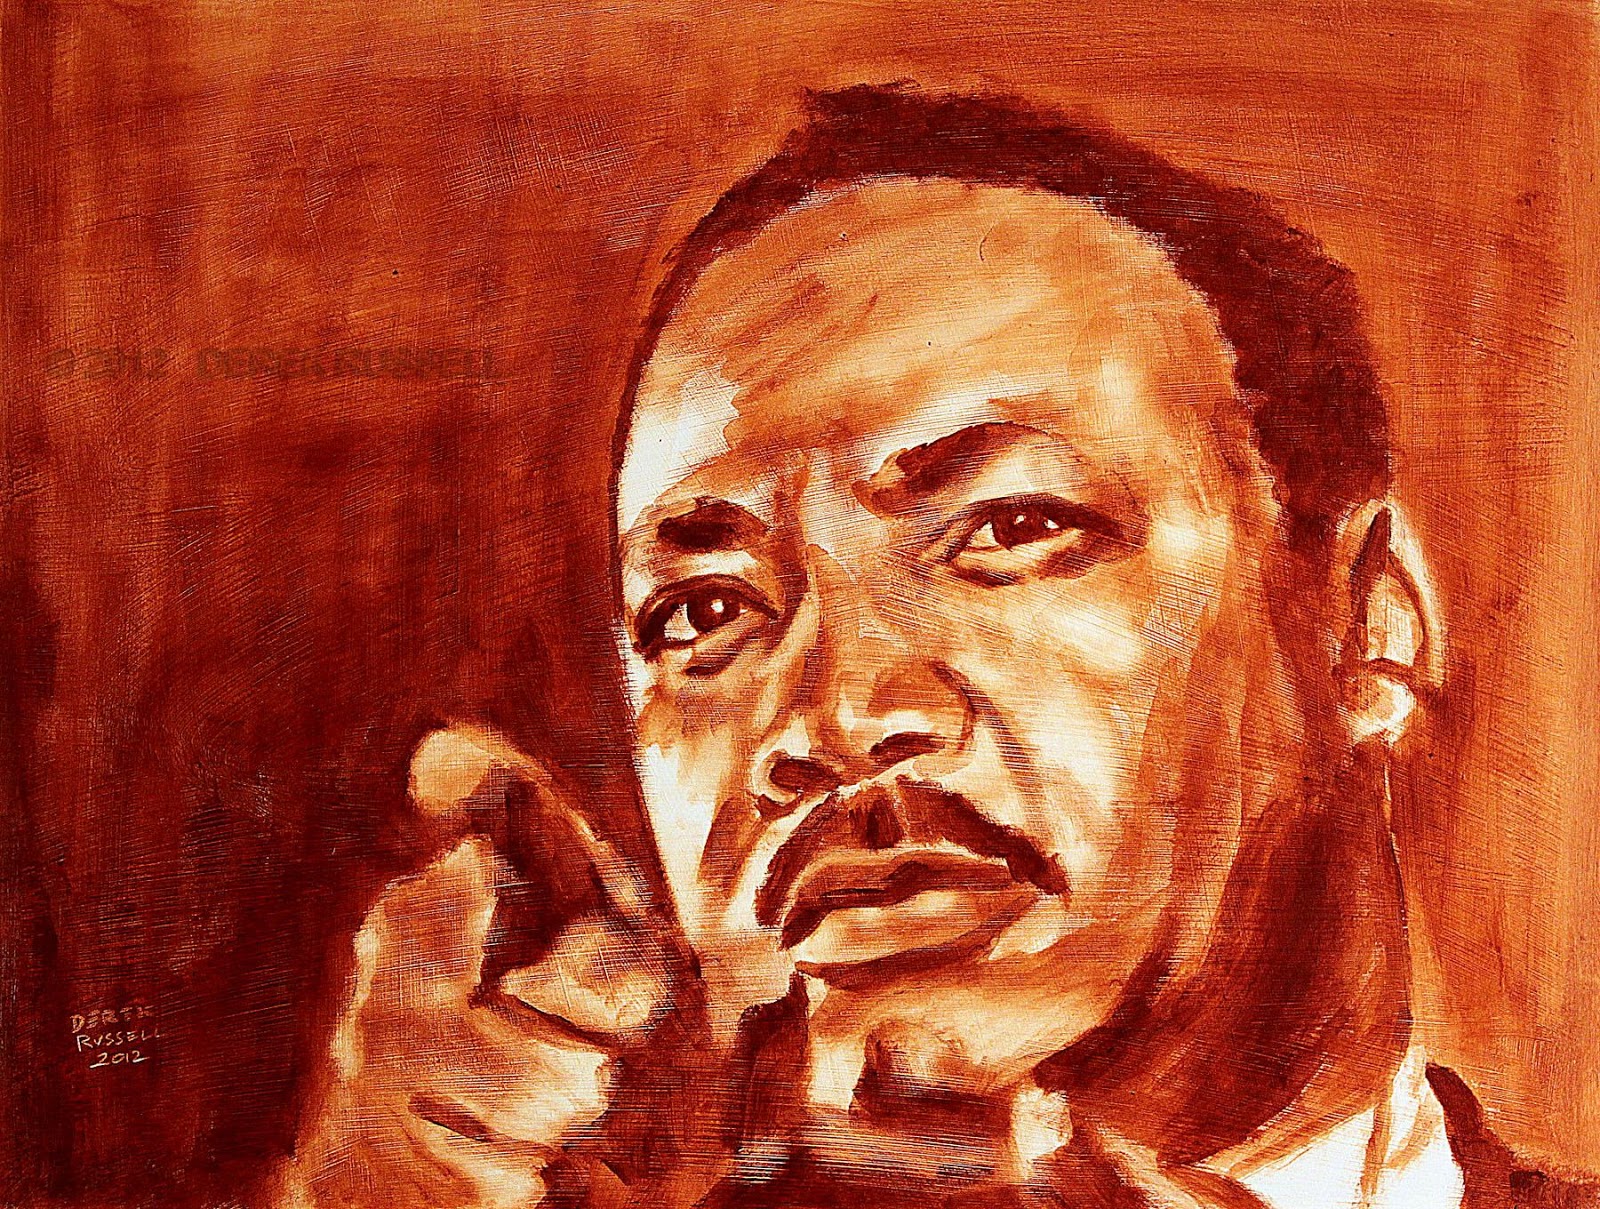 Famous Wallpapers: Martin Luther King, Jr. wallpapers